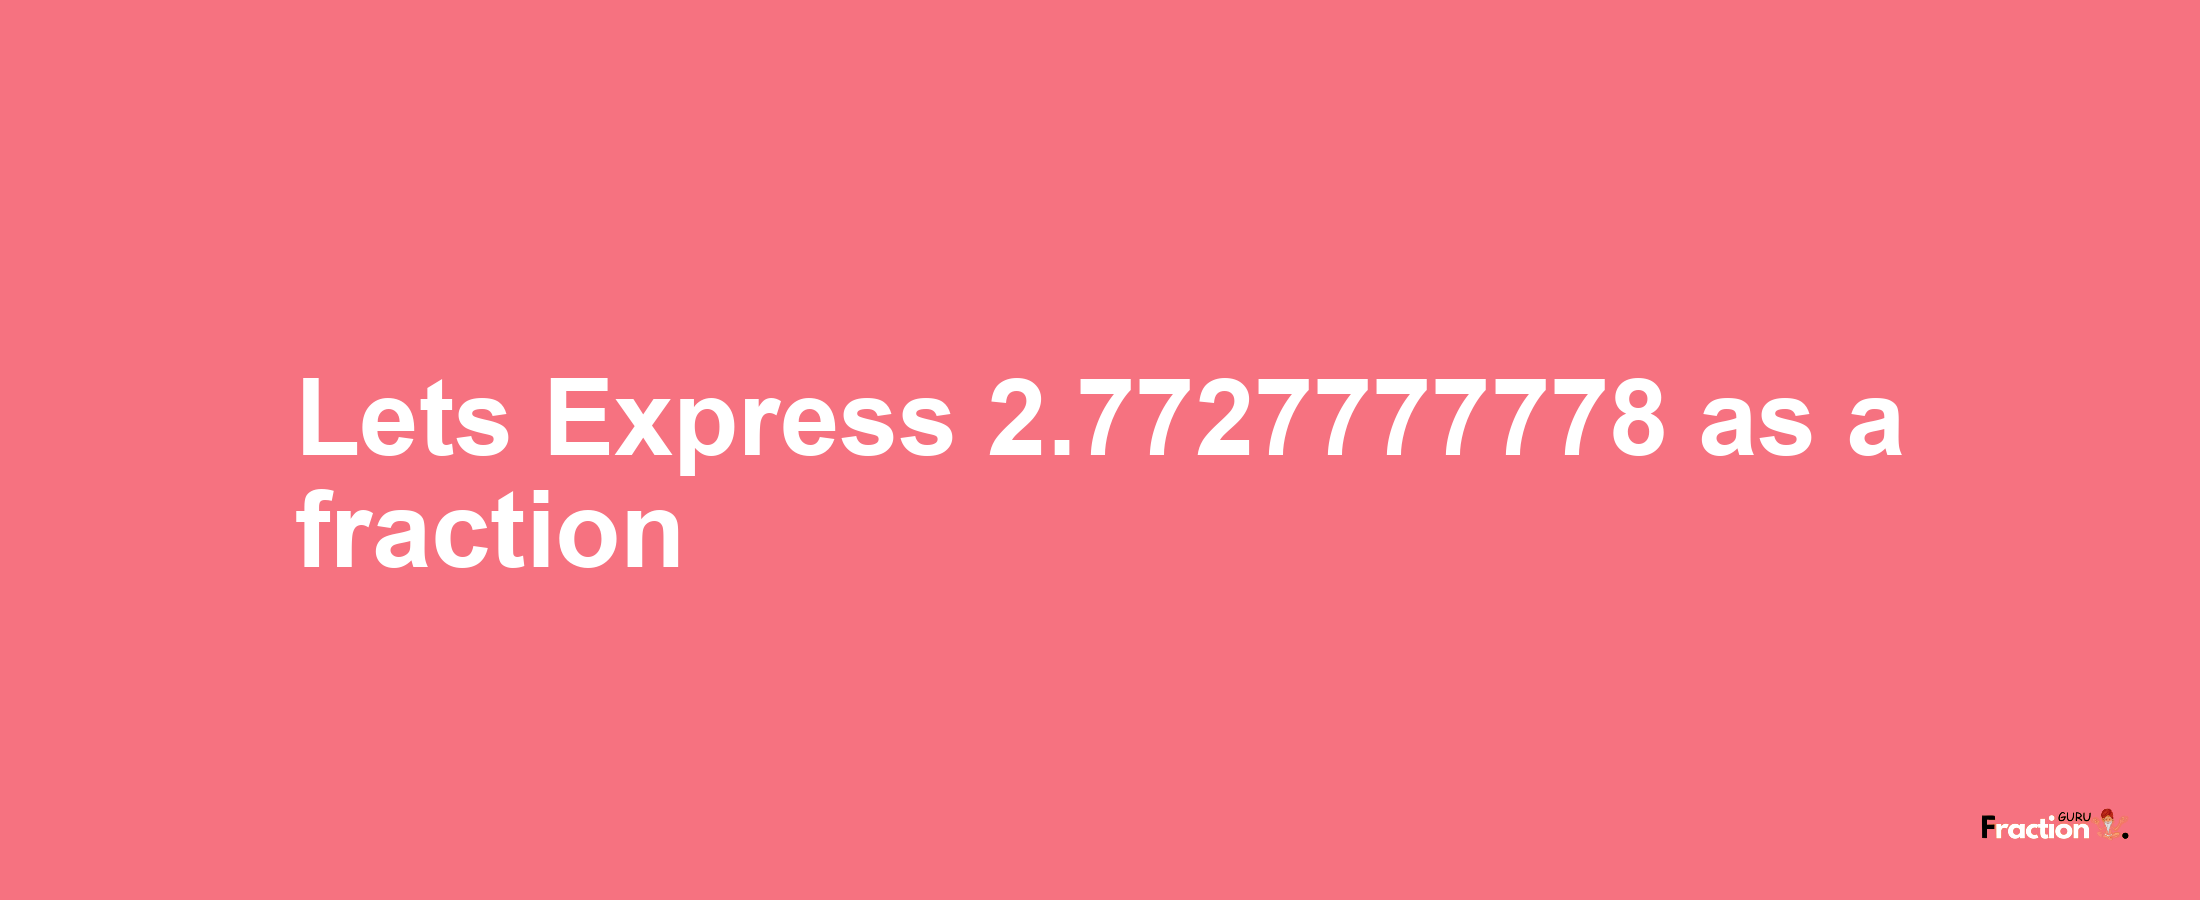 Lets Express 2.7727777778 as afraction